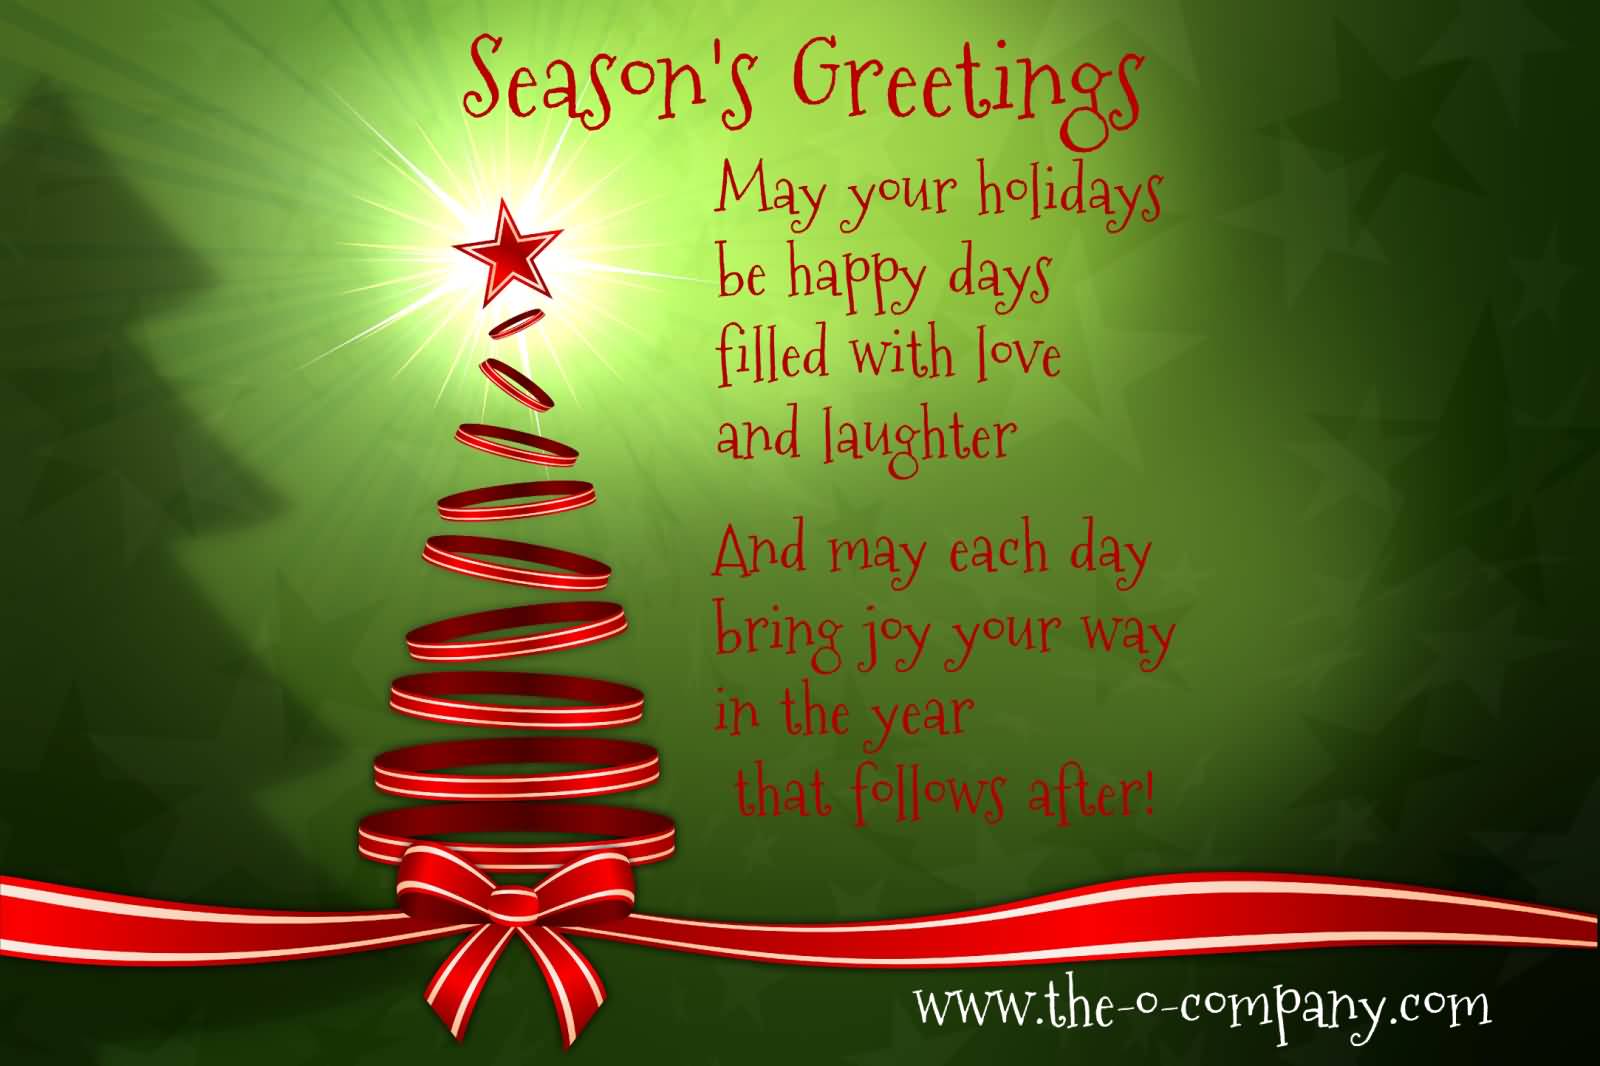 Season's Greetings May Your Holidays Be Happy Days Filled With Love And Laughter